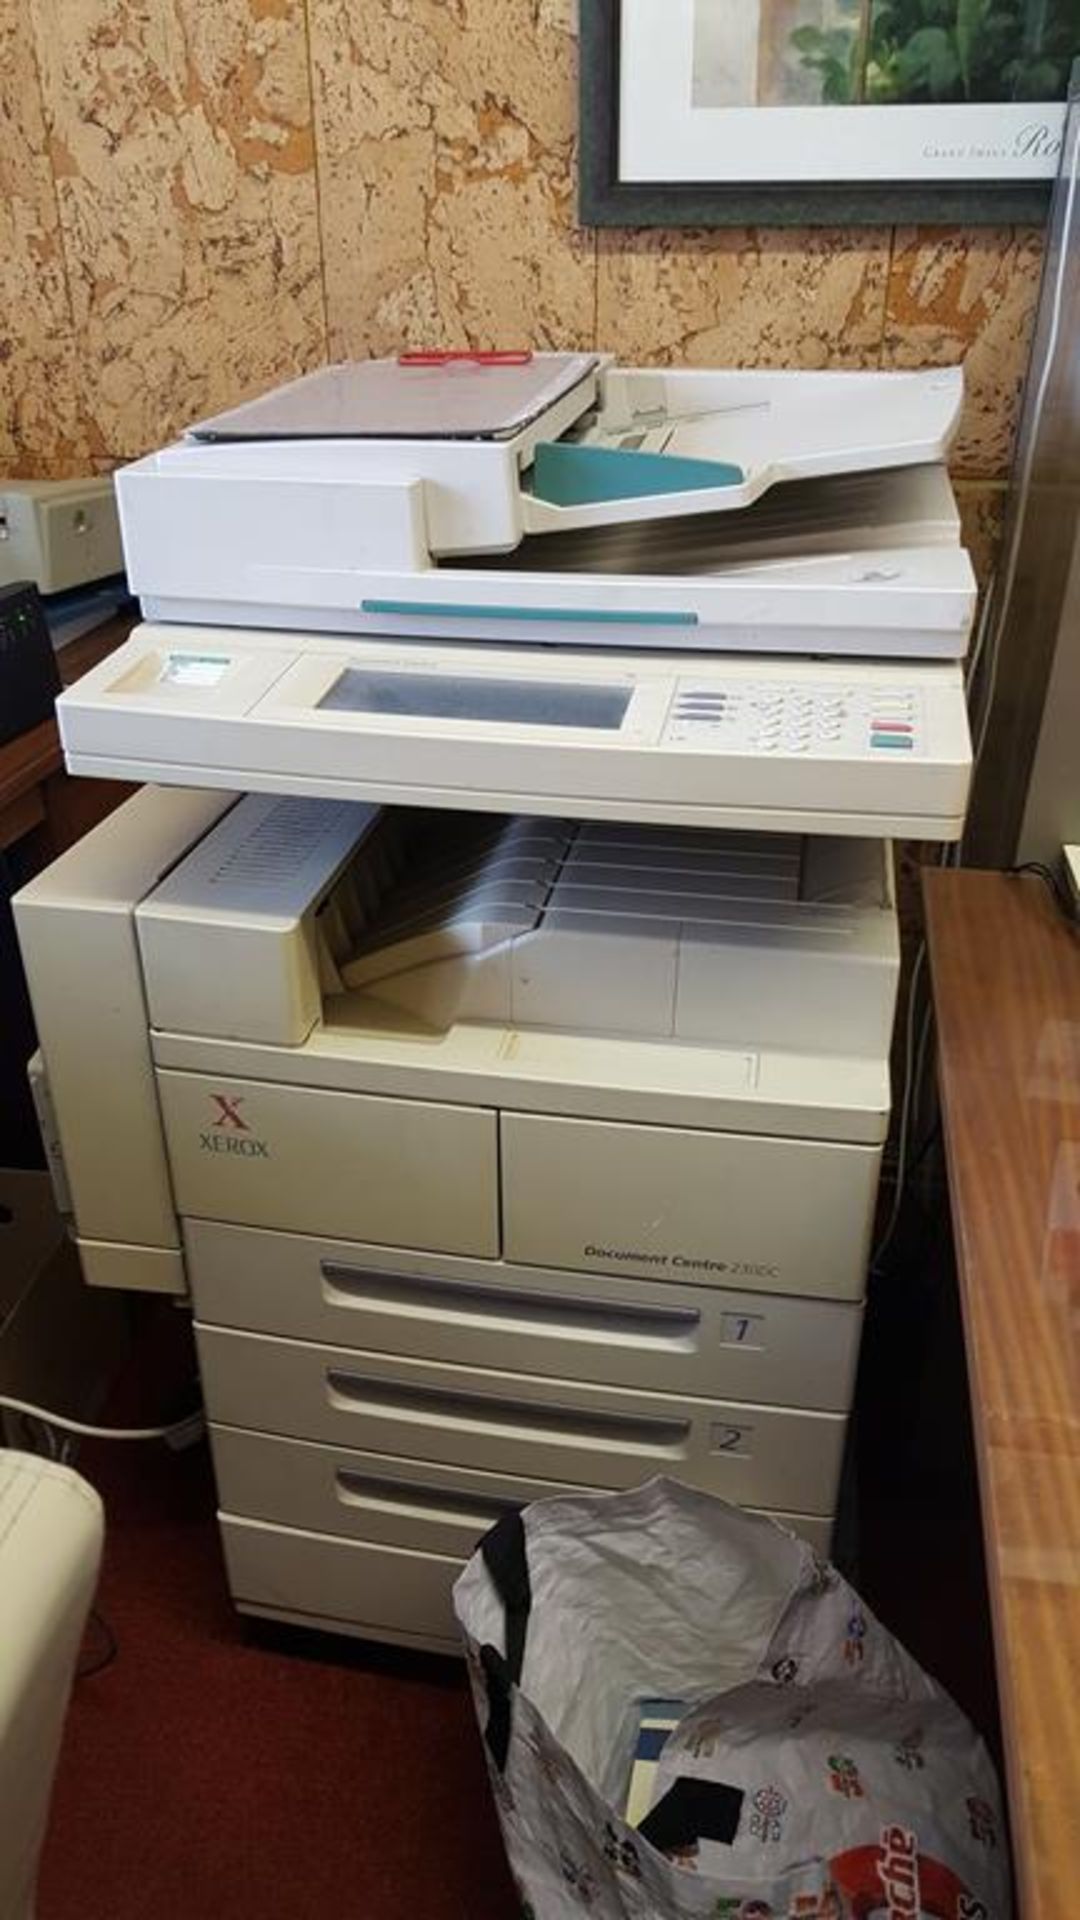 Brother fax machine and xerox printer/photocopier - Image 2 of 2